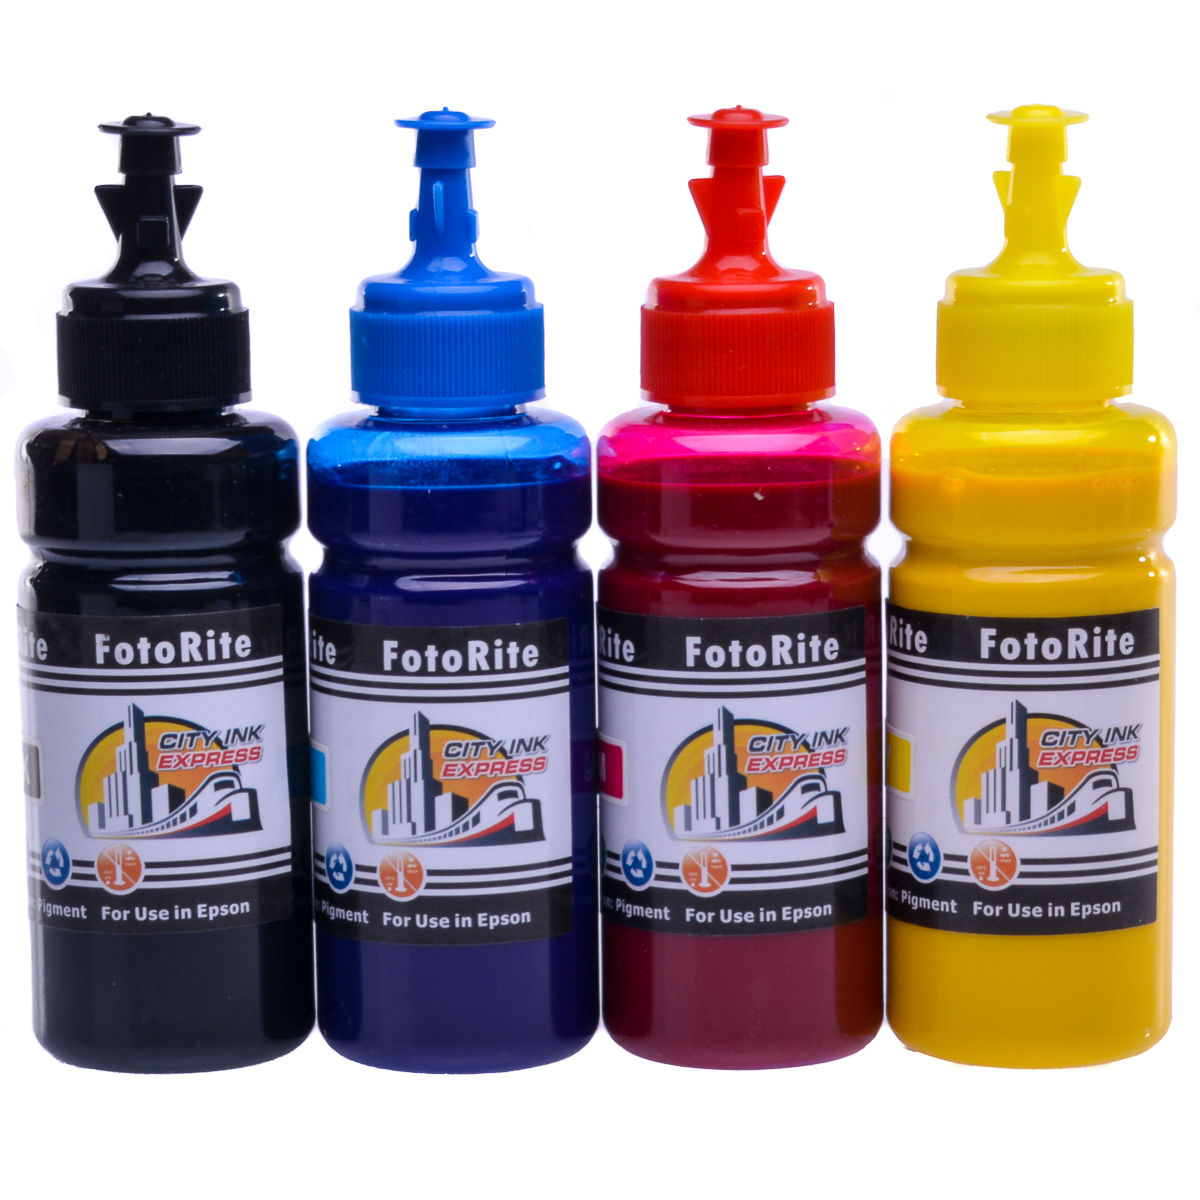 Cheap Multipack pigment ink refill replaces Epson Stylus BX3450